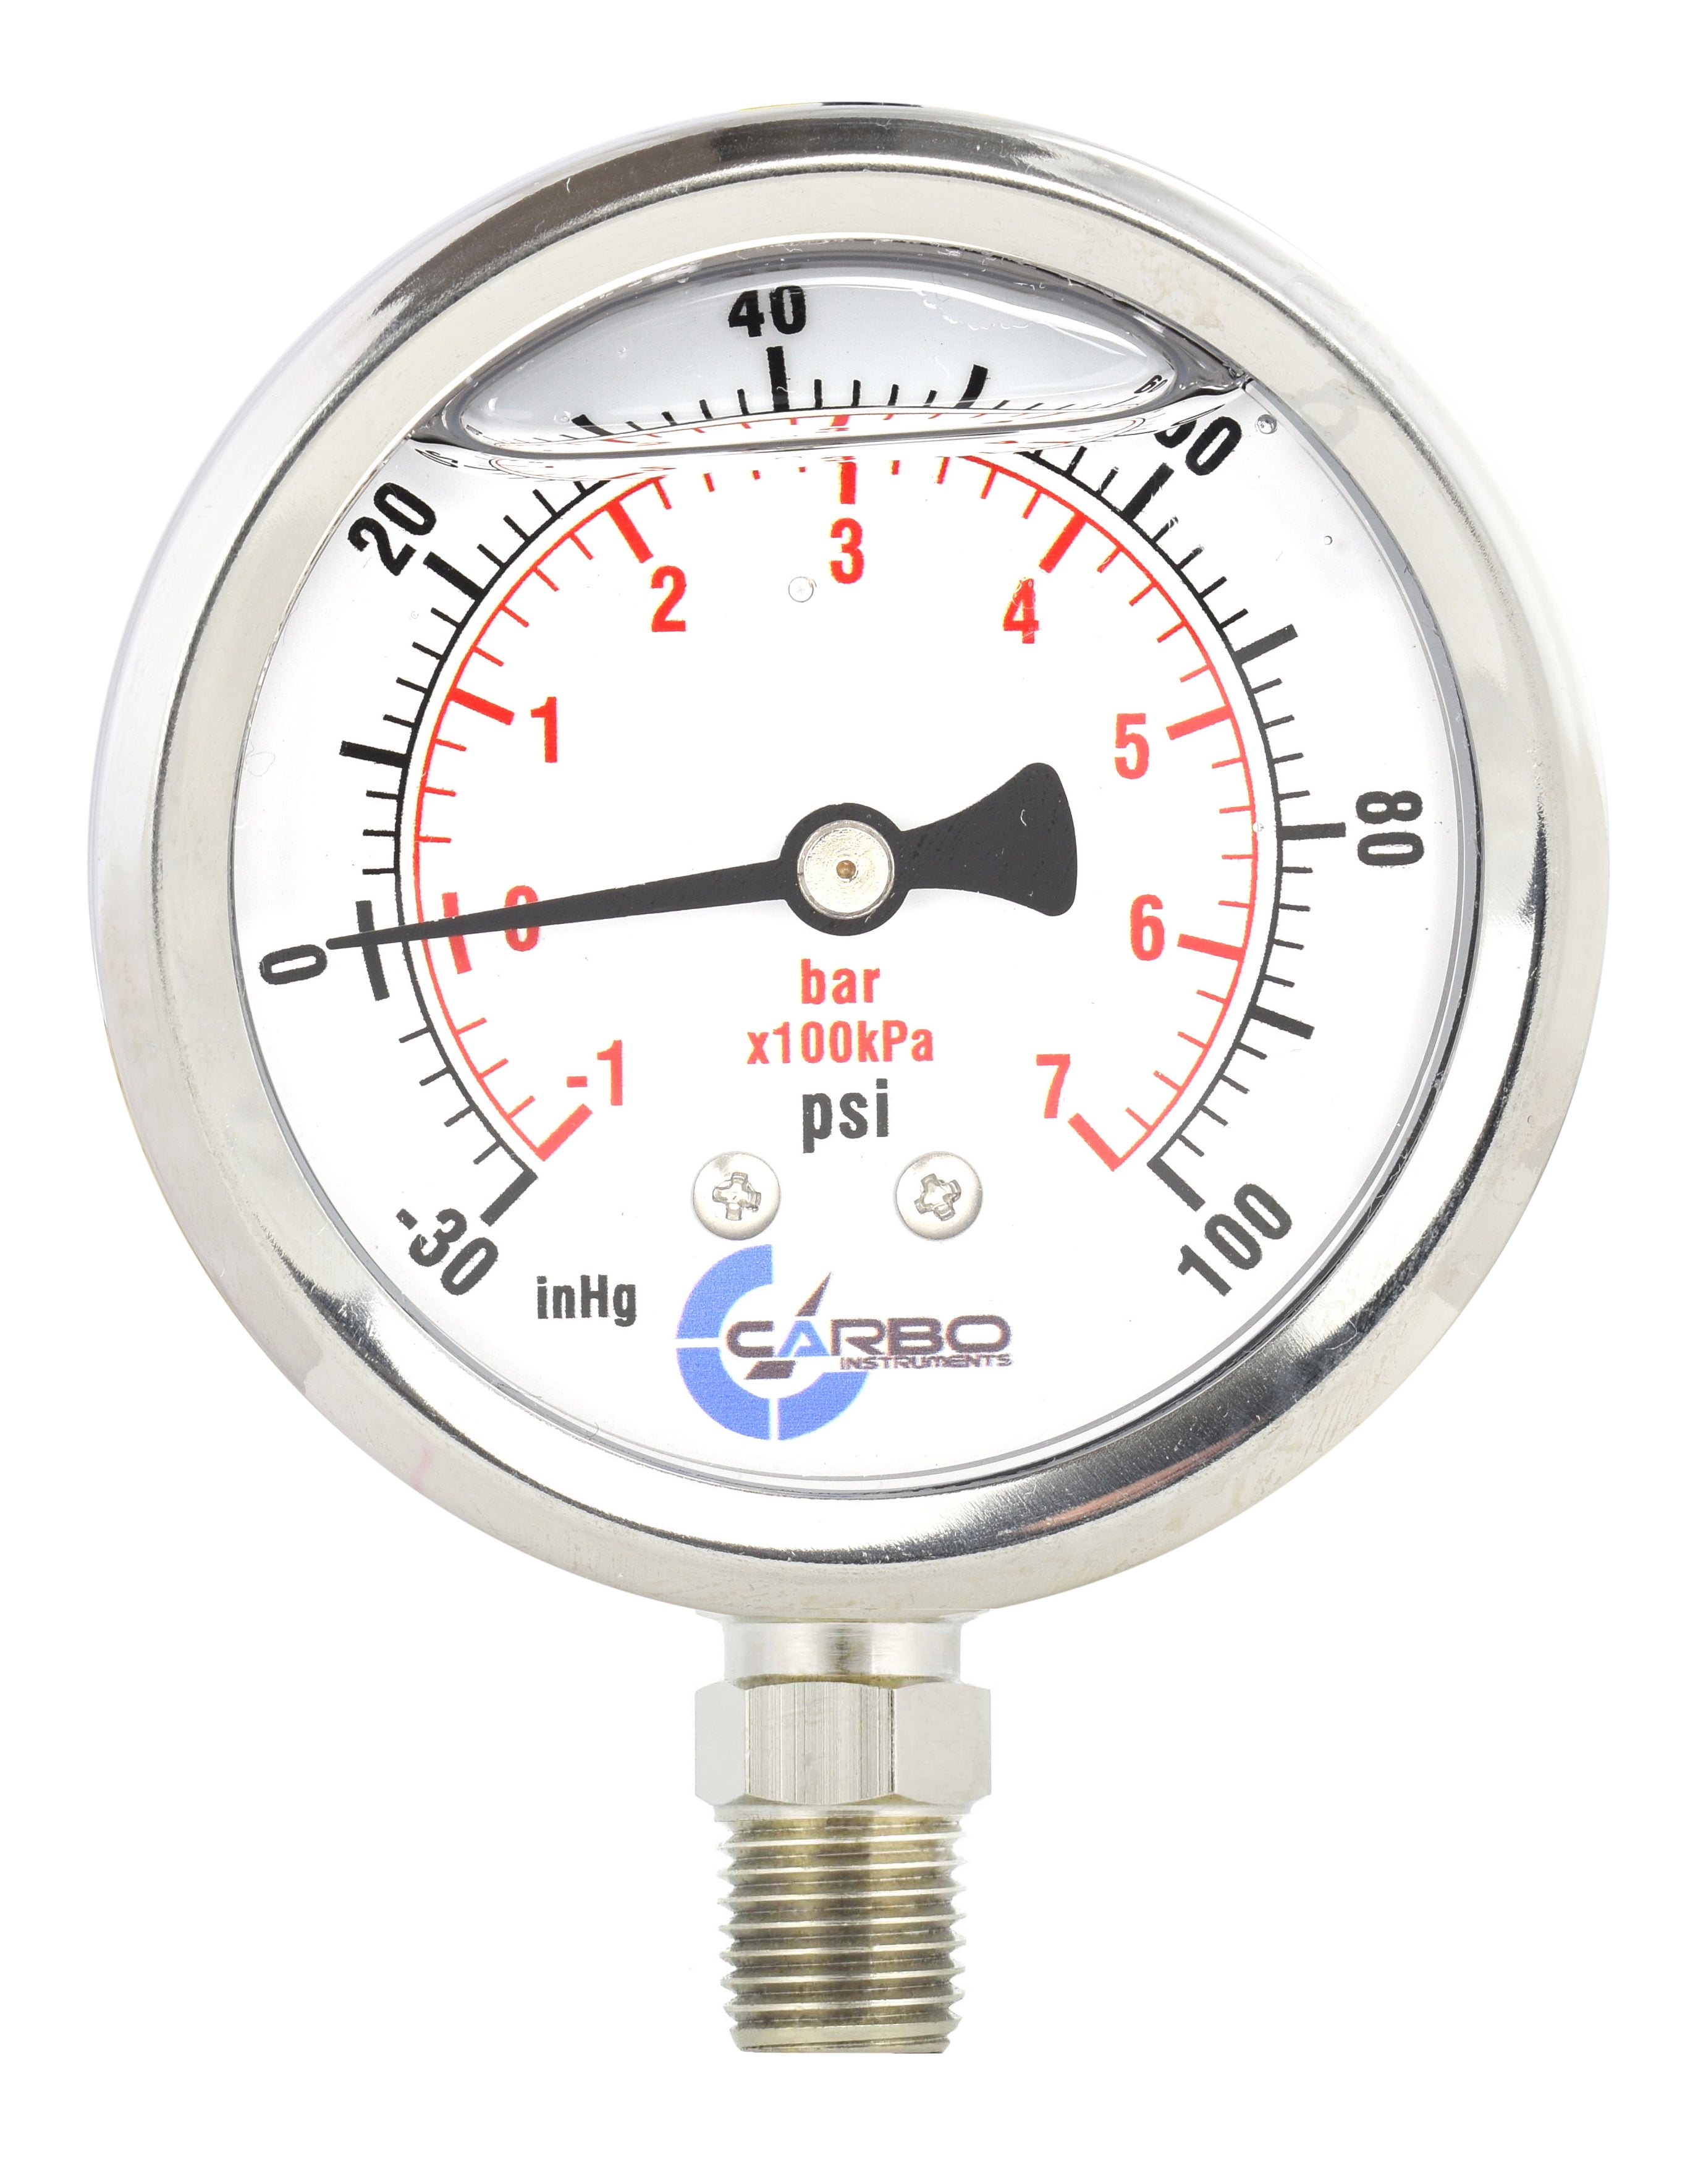 Lower Mount 1/4 NPT Chrome Plated Brass Connection Stainless Steel Case 0-100 psi/kPa Lqiuid Filled CARBO Instruments 2 1/2 Pressure Gauge